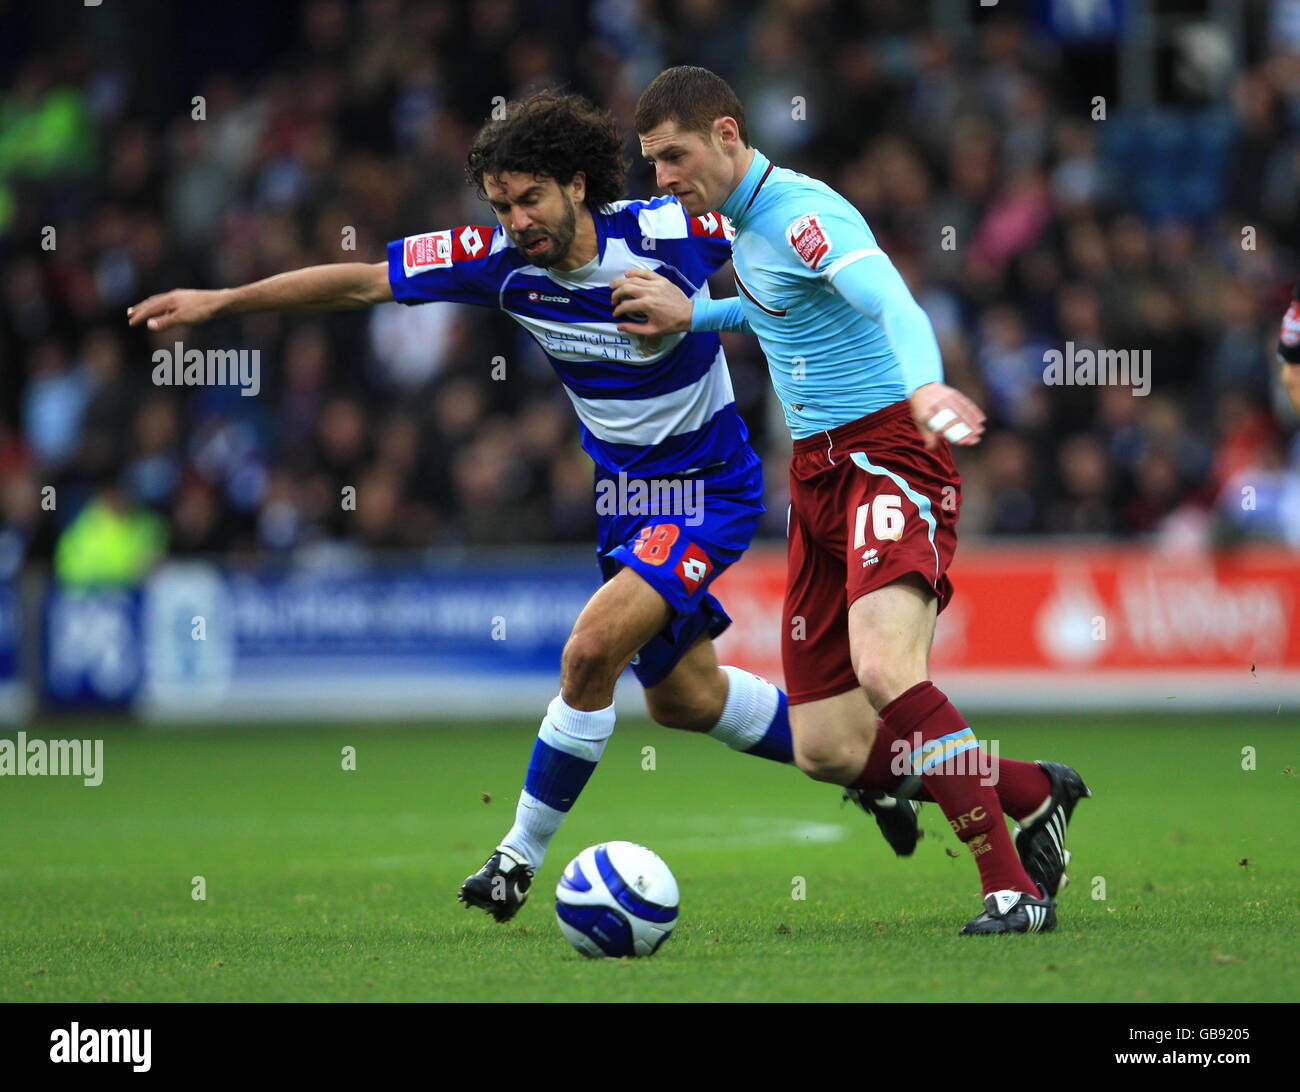 Queens Park Rangers' Damiano Tommasi and Burnley's Chris McCann battle for the ball during the Coca-Cola Football Championship match at Loftus Road, London. Stock Photo